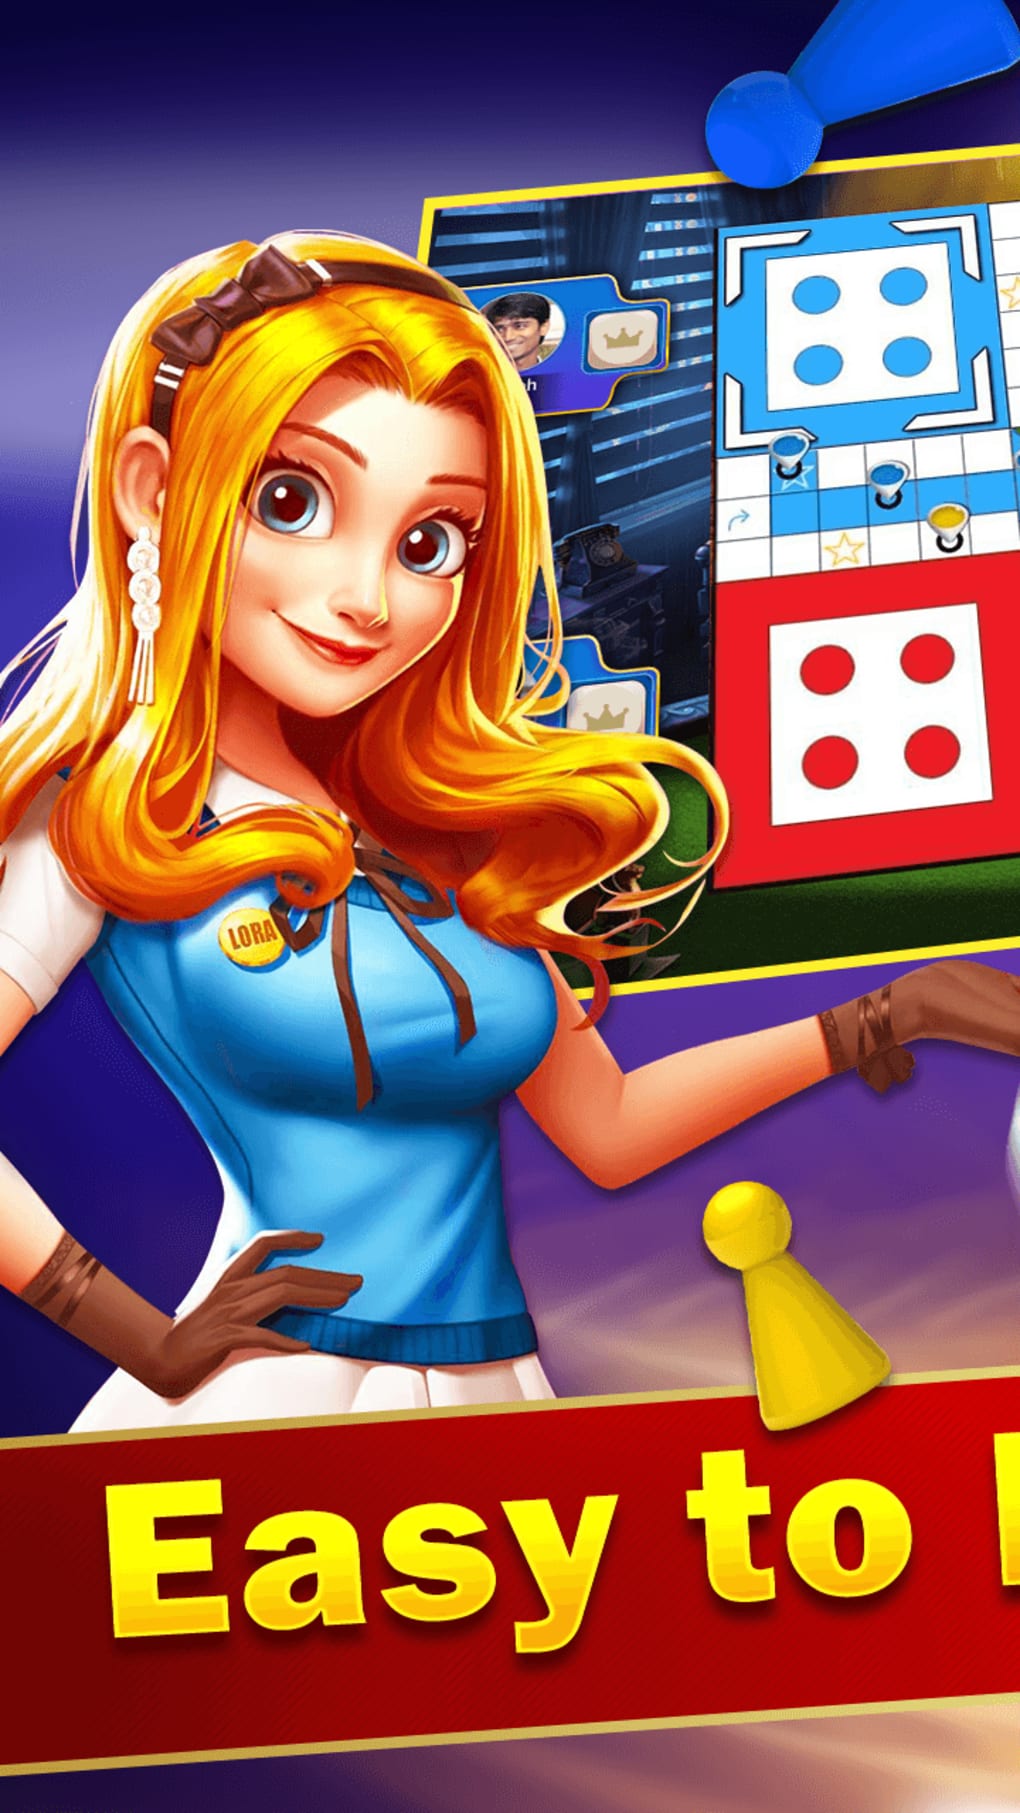 Ludo Hero Ludo Pro 2018 Apk Download for Android- Latest version 17.0.0-  com.sifaweludogame.app